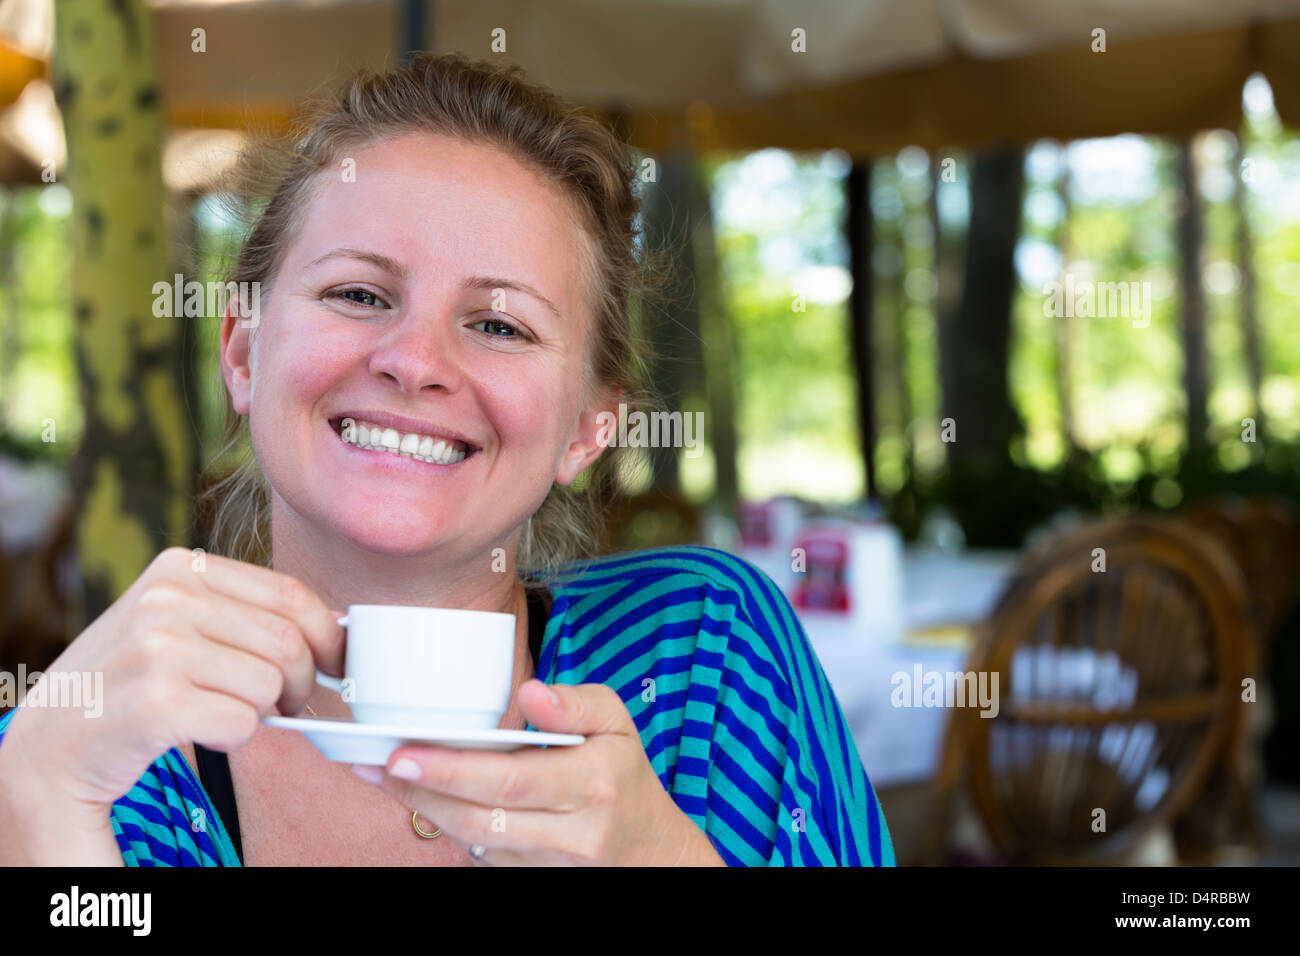 Nothing makes me happier than a cup of Turkish coffee in the mornings. A large smile comes from a Turkish girl. Stock Photo